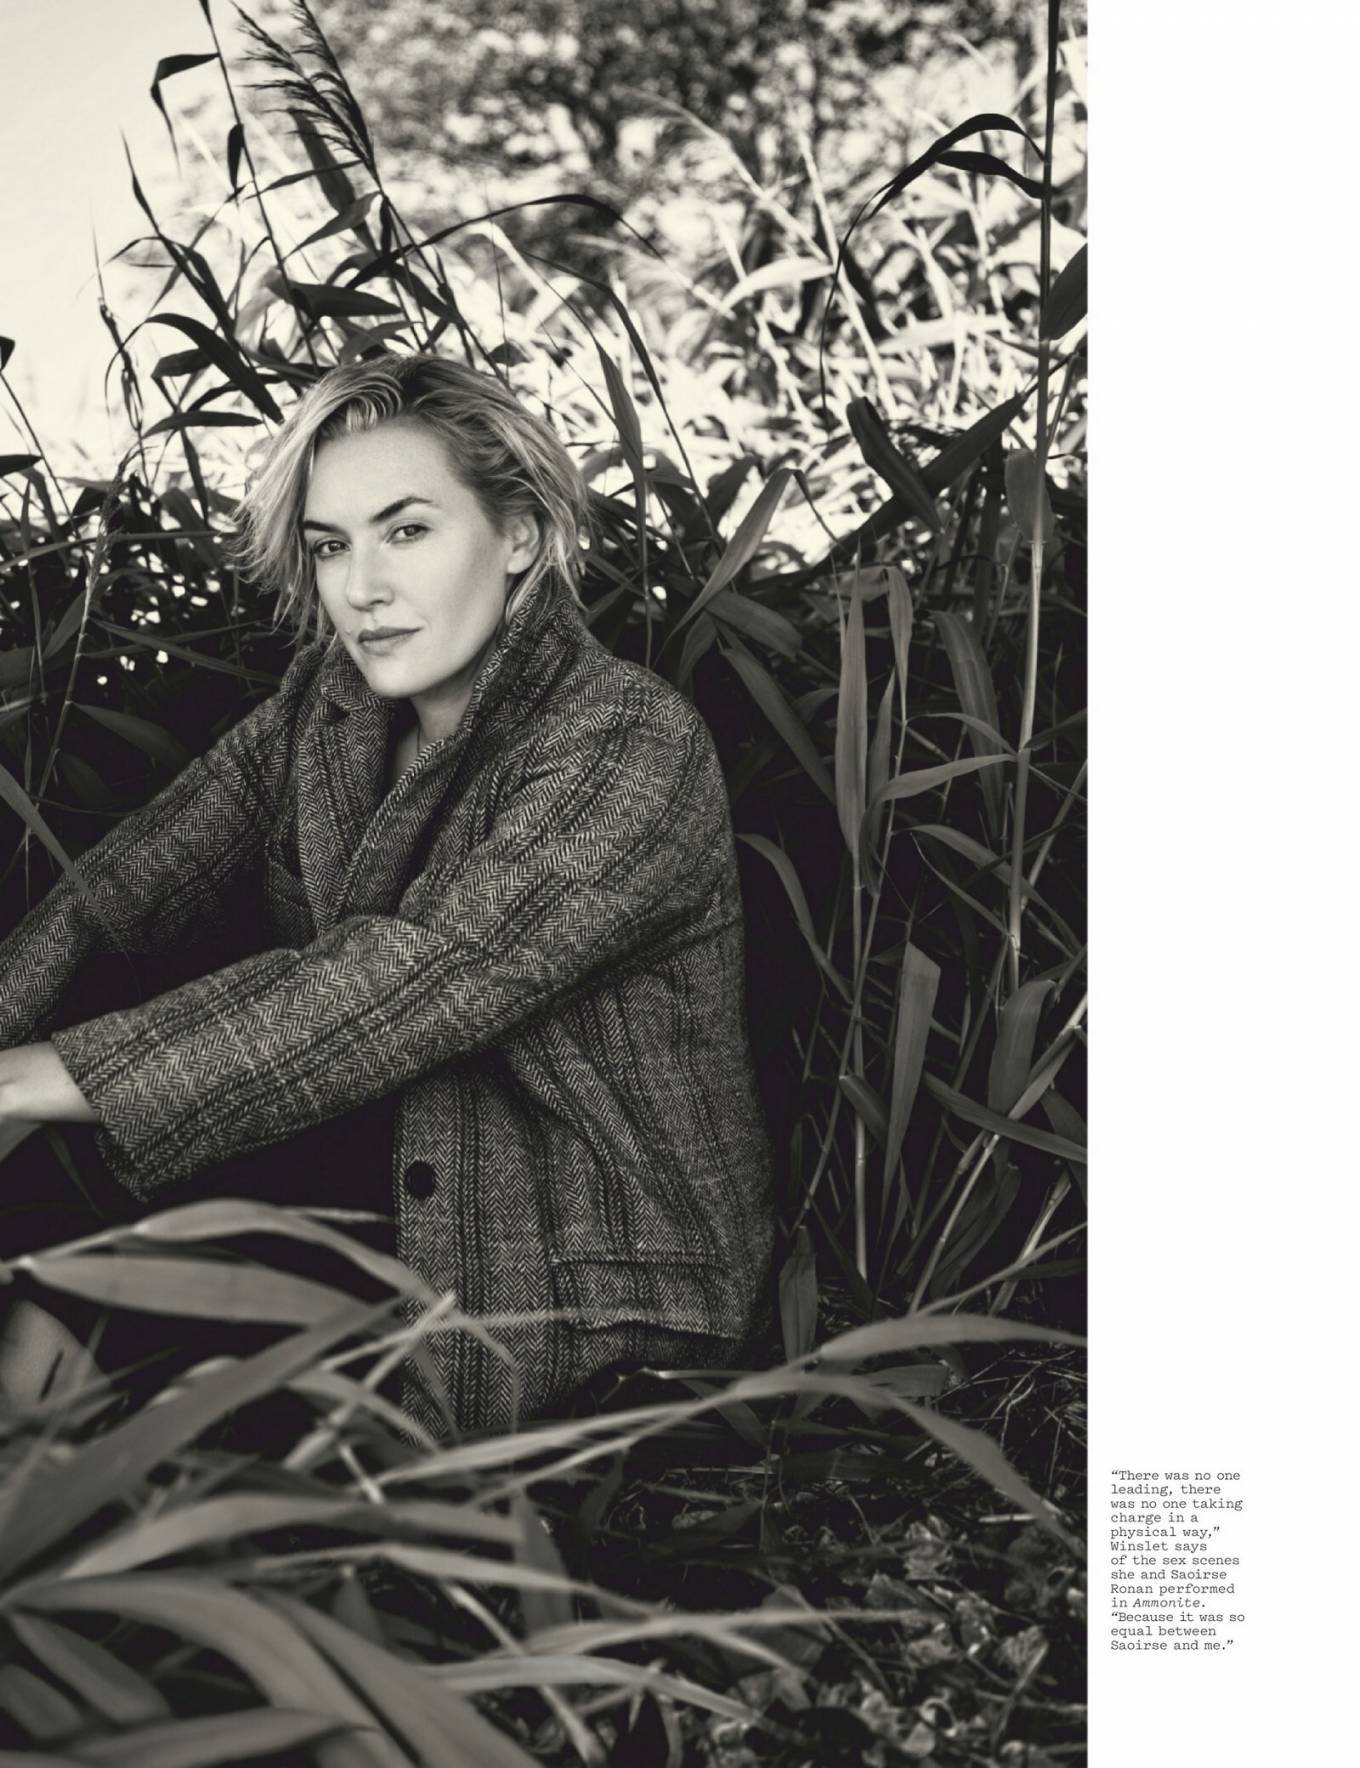 Kate Winslet 2020 : Kate Winslet - The Hollywood Reporter Magazine (August ...